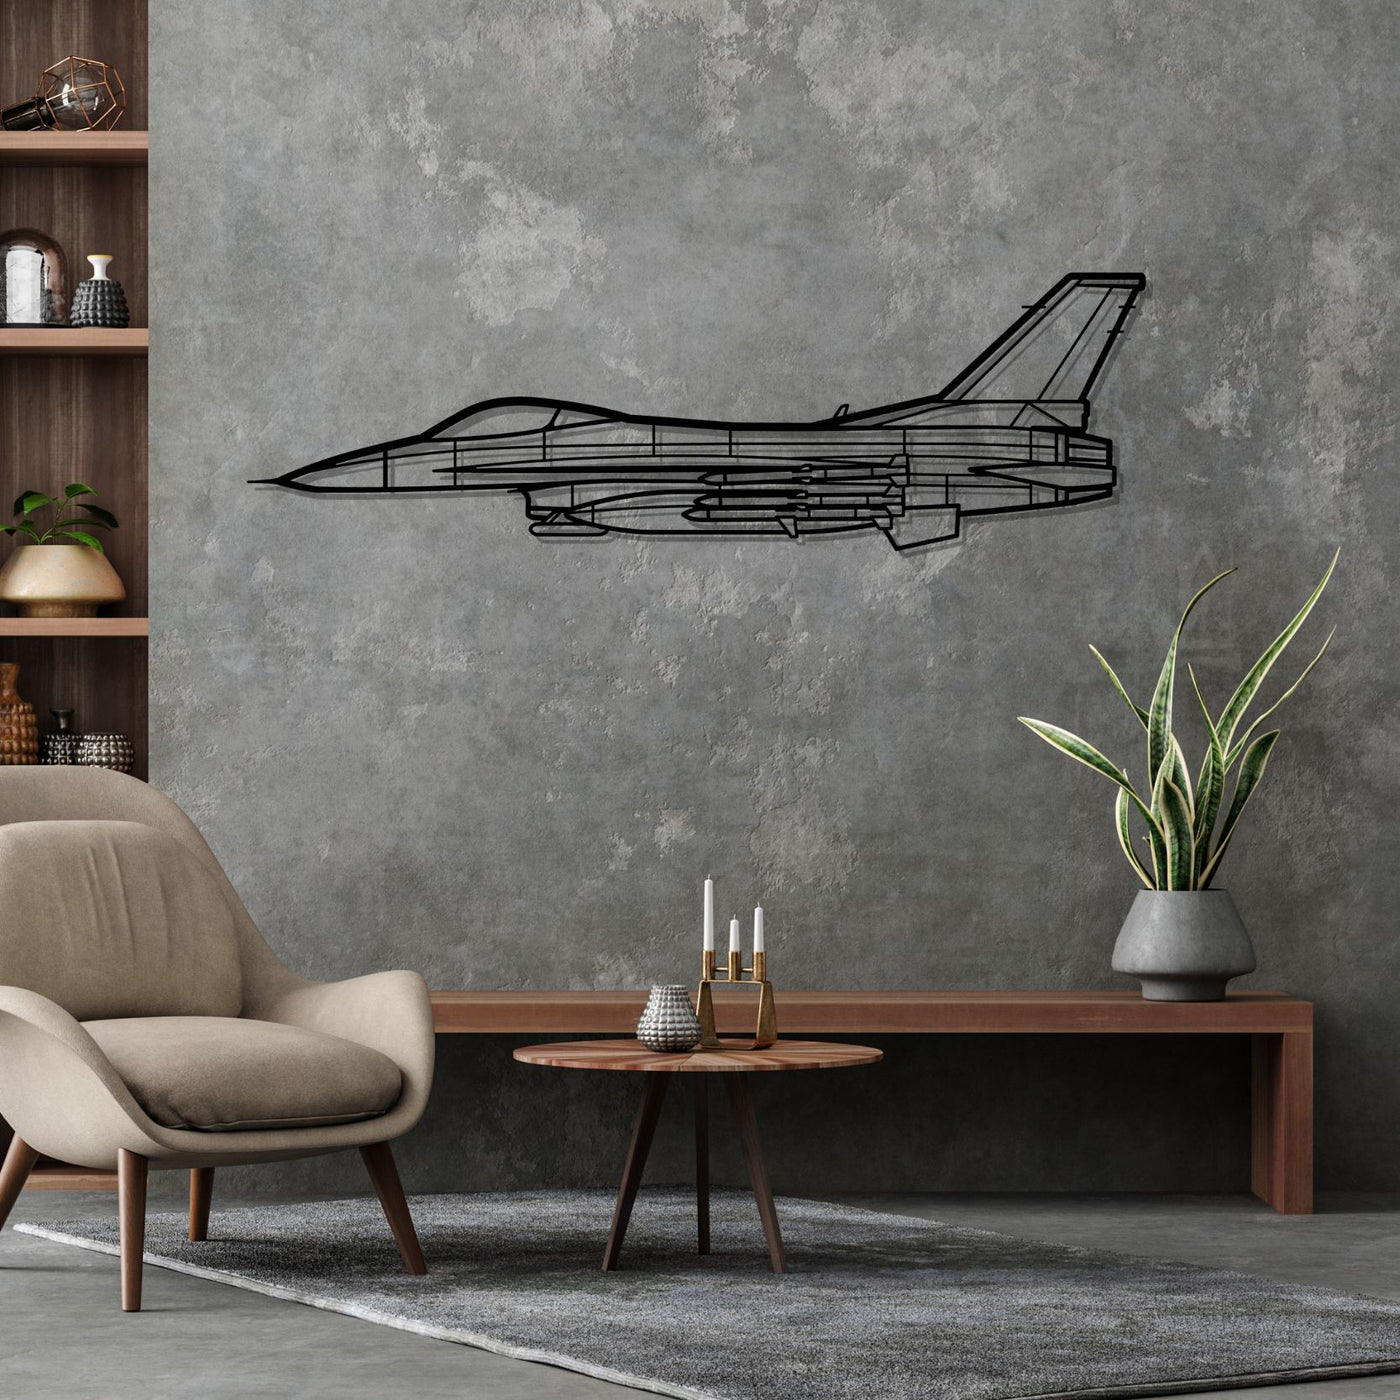 F-16C Missiles Silhouette Metal Wall Art